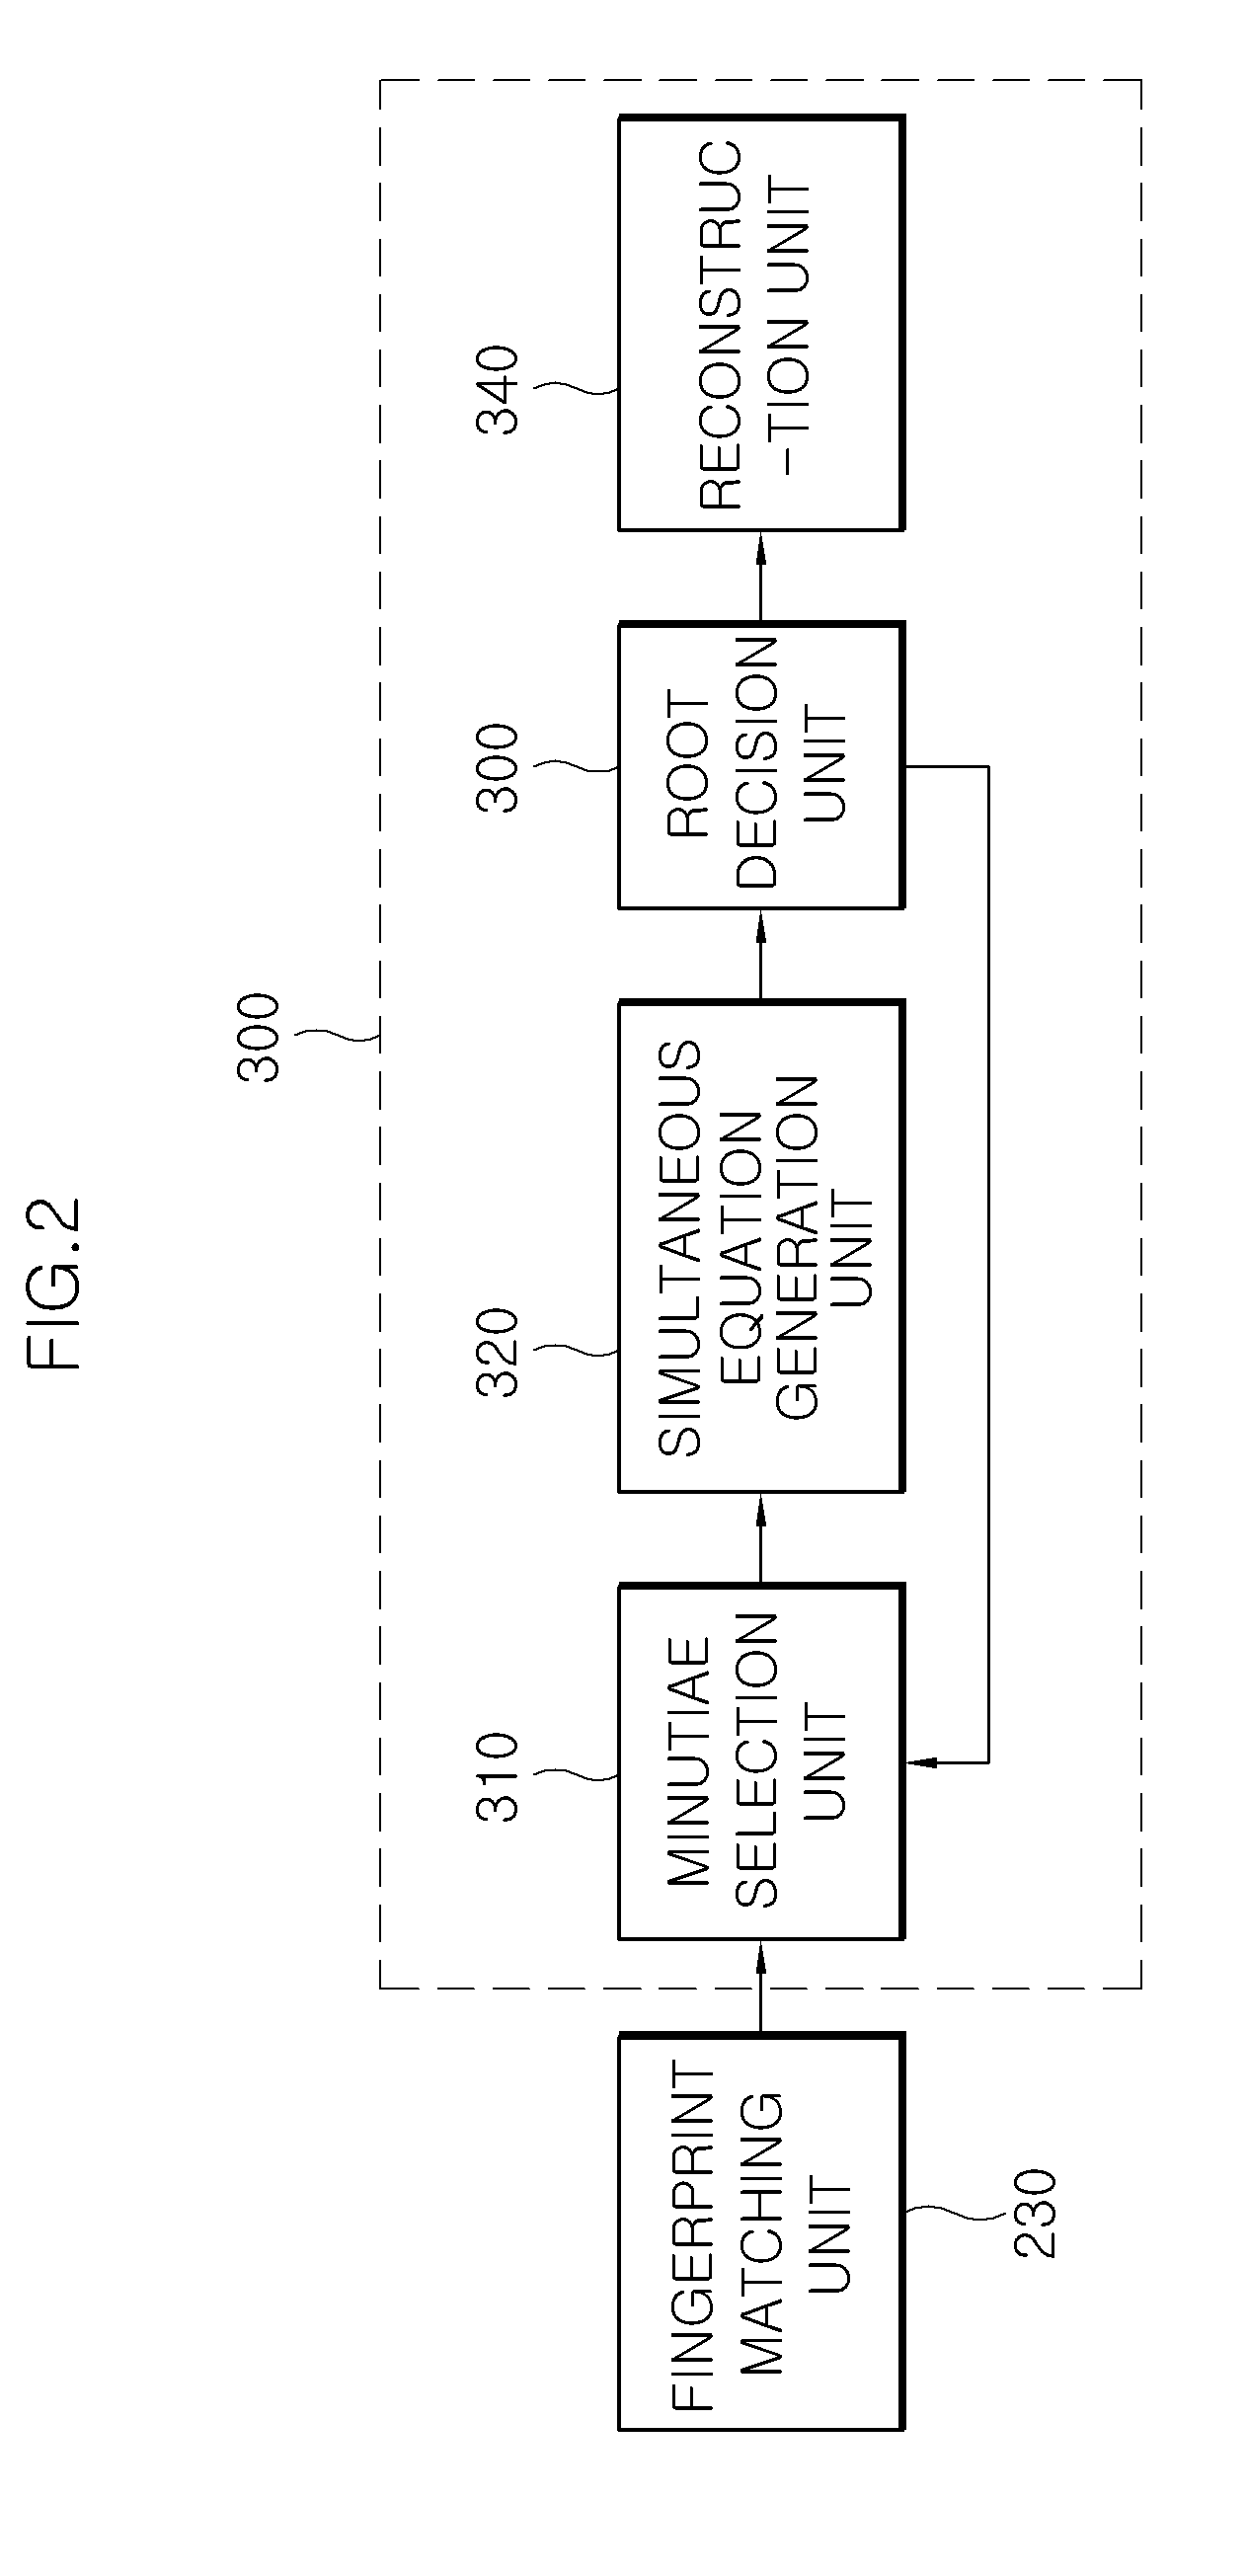 Apparatus and method for polynomial reconstruction in fuzzy vault system